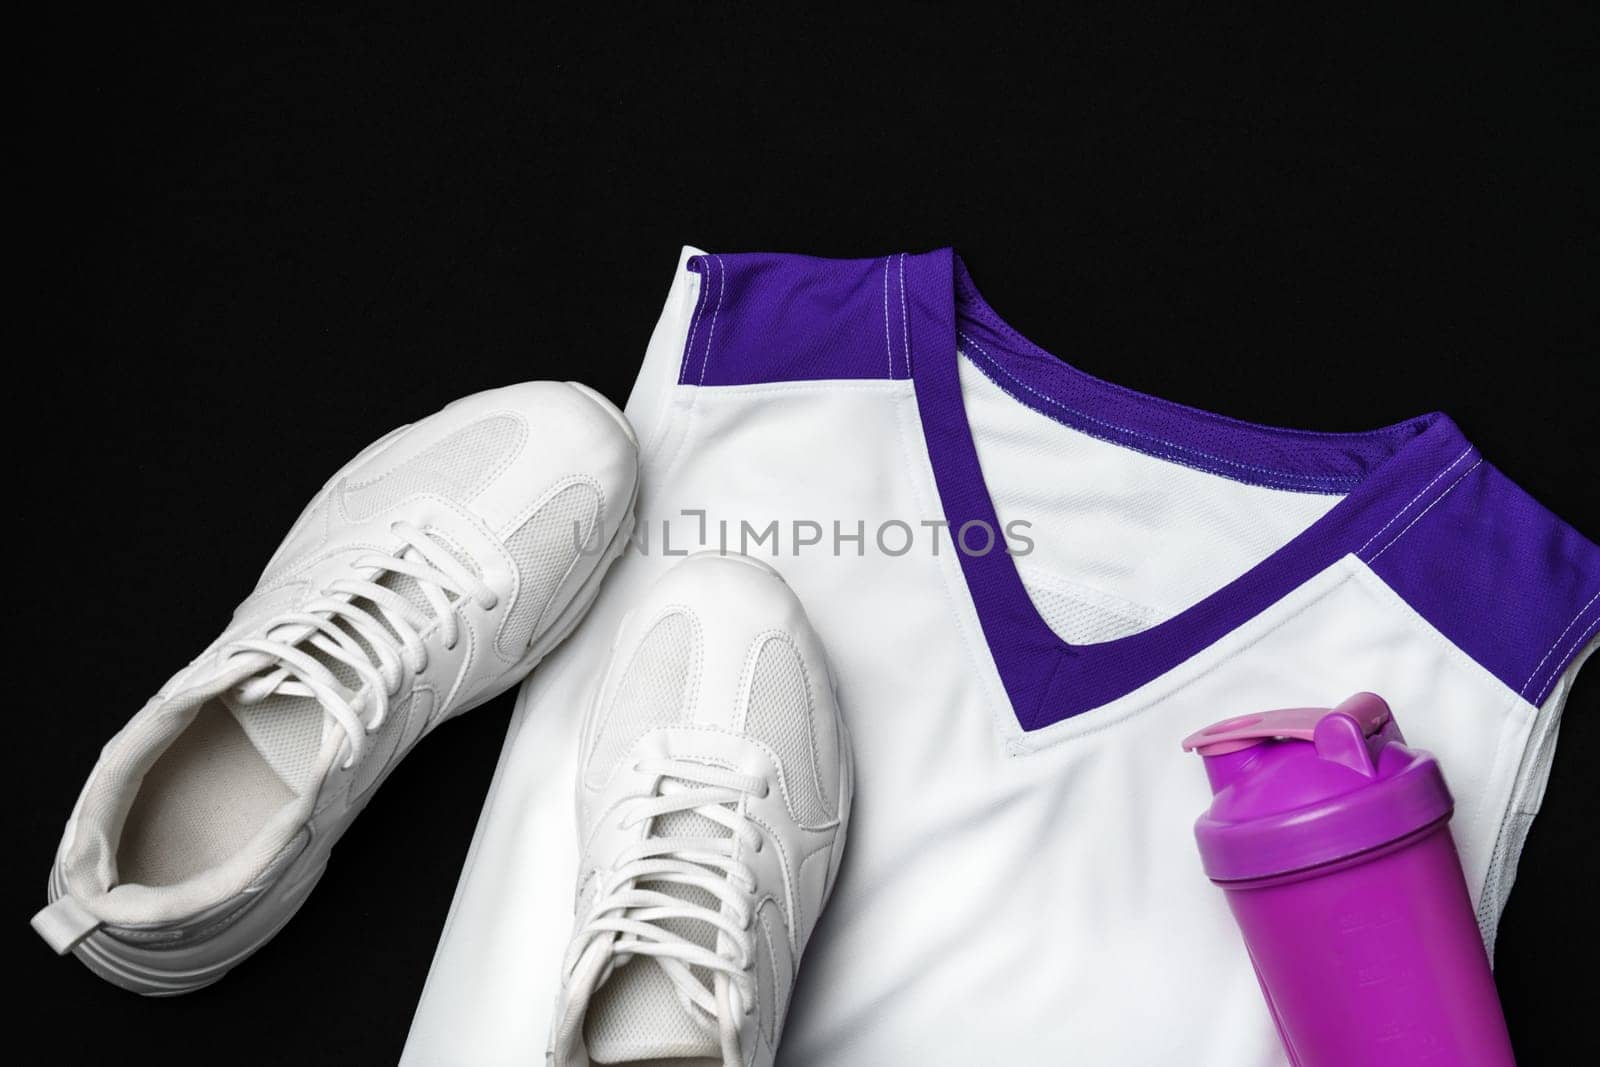 A pair of white sneakers with a purple and white tank top are laid out neatly next to a purple shaker bottle, all arranged against a stark black backdrop, suggesting a preparedness for a fitness or athletic endeavor.